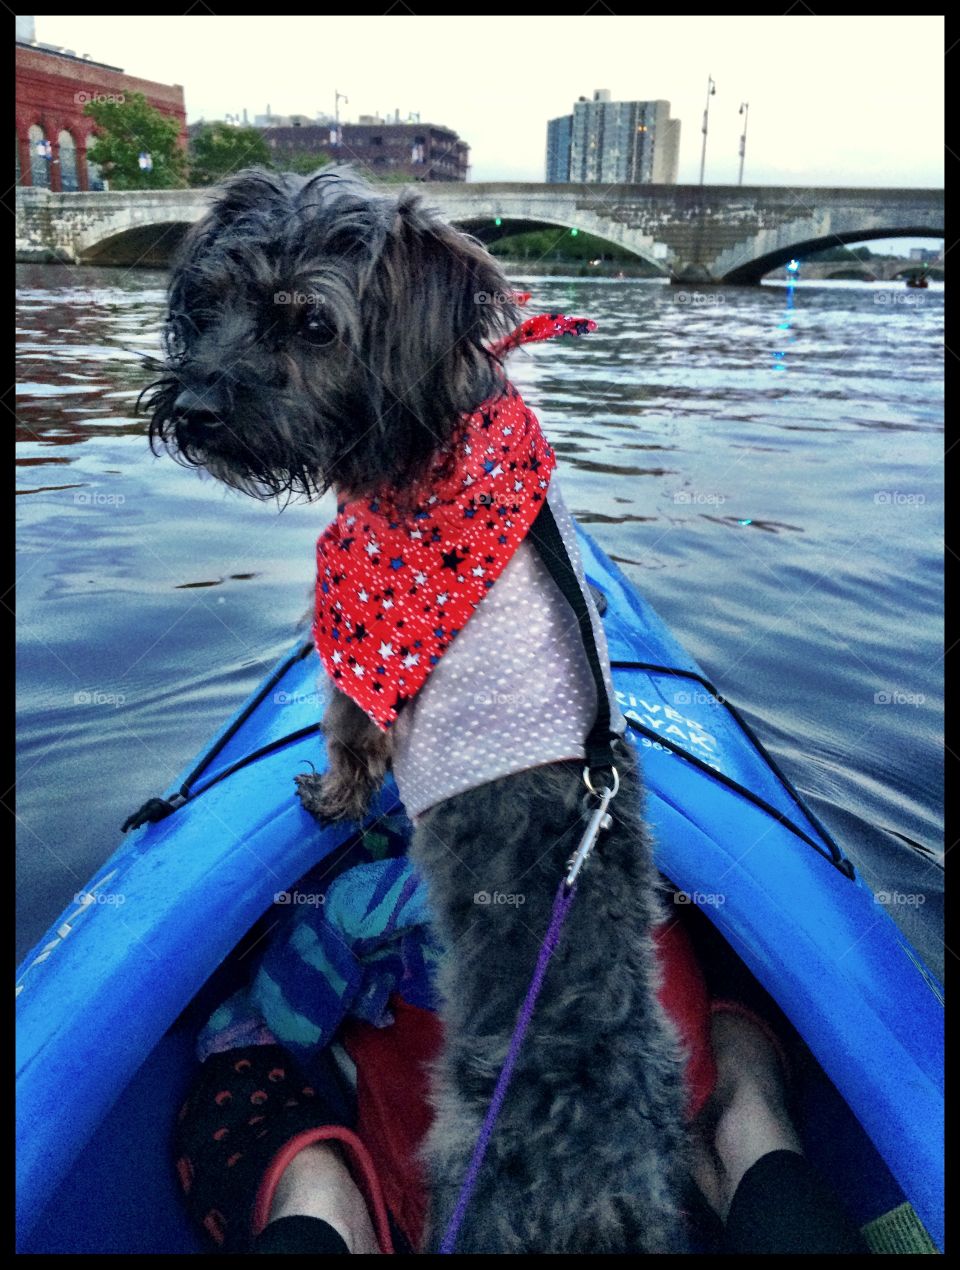 Kayaking dog. We went up the Boston's Charles river to see the 4th of July fireworks.  My dog stood at attention as captainthroughout!